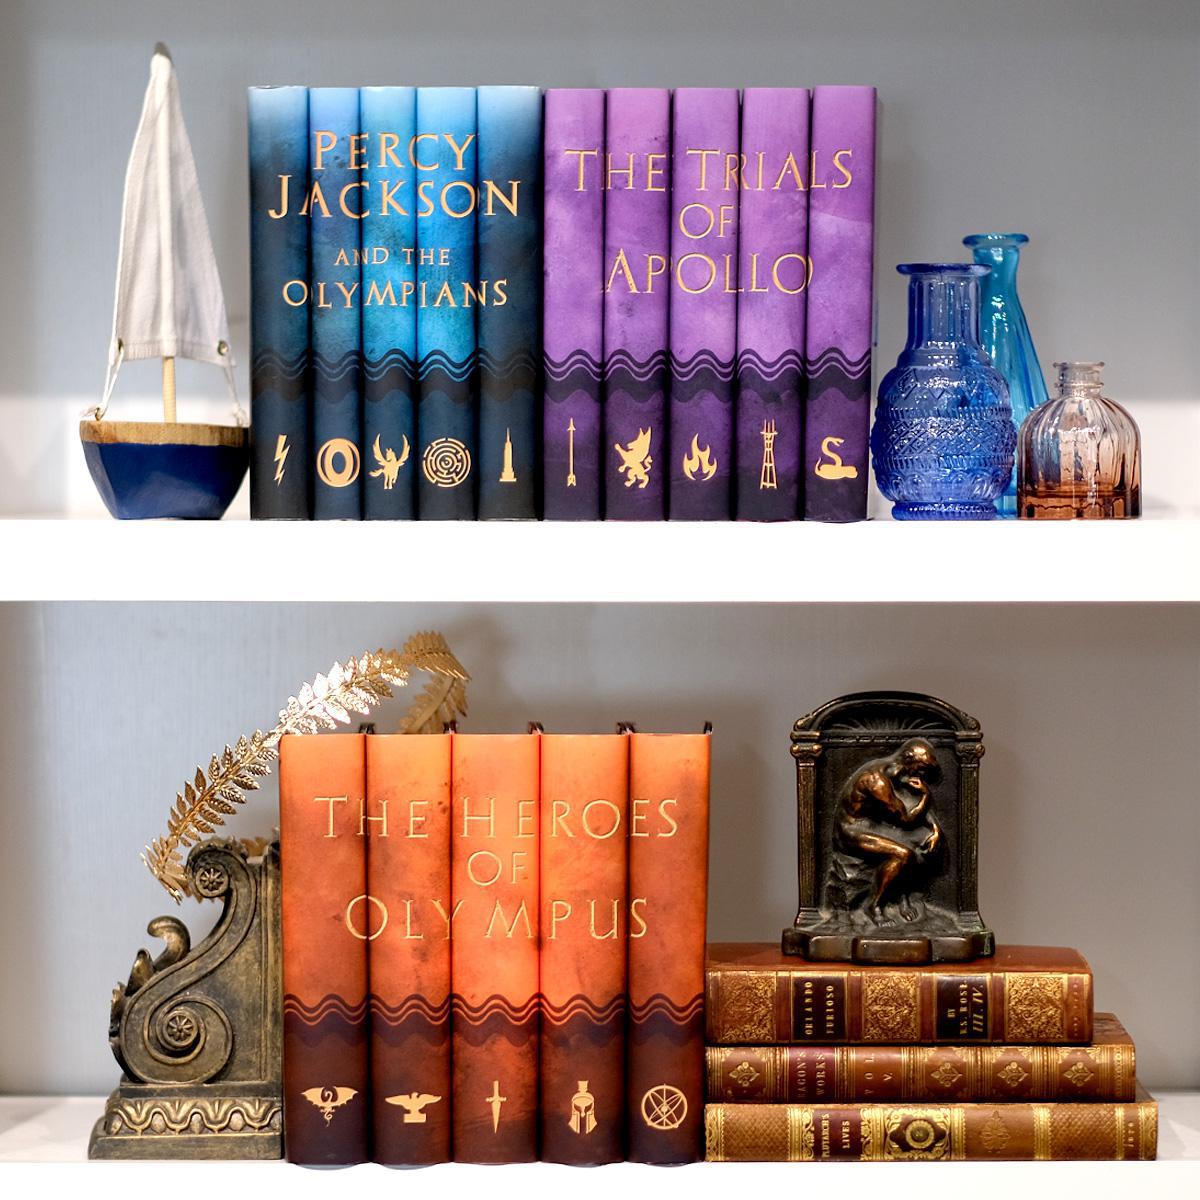 Trials of Apollo, Percy Jackson and the Olympians, and The Heroes of Olympus custom collectible book sets from Juniper Books on a white book shelf.